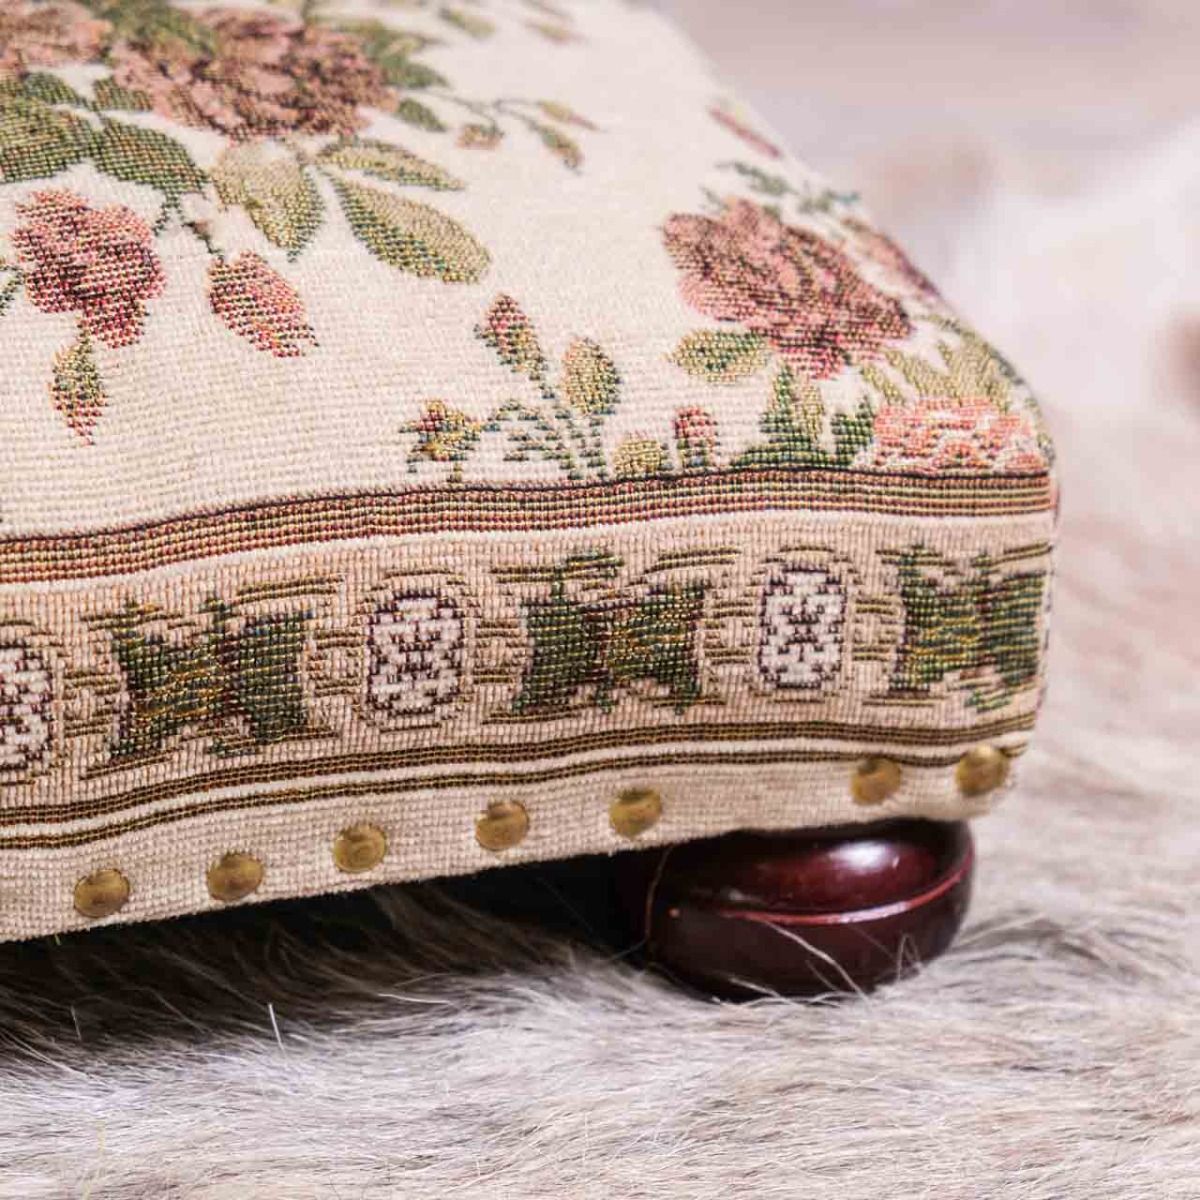 Mini Tapestry Pouf,Tapestry Vintage,Antique handmade mini tapestry foot pouf from France